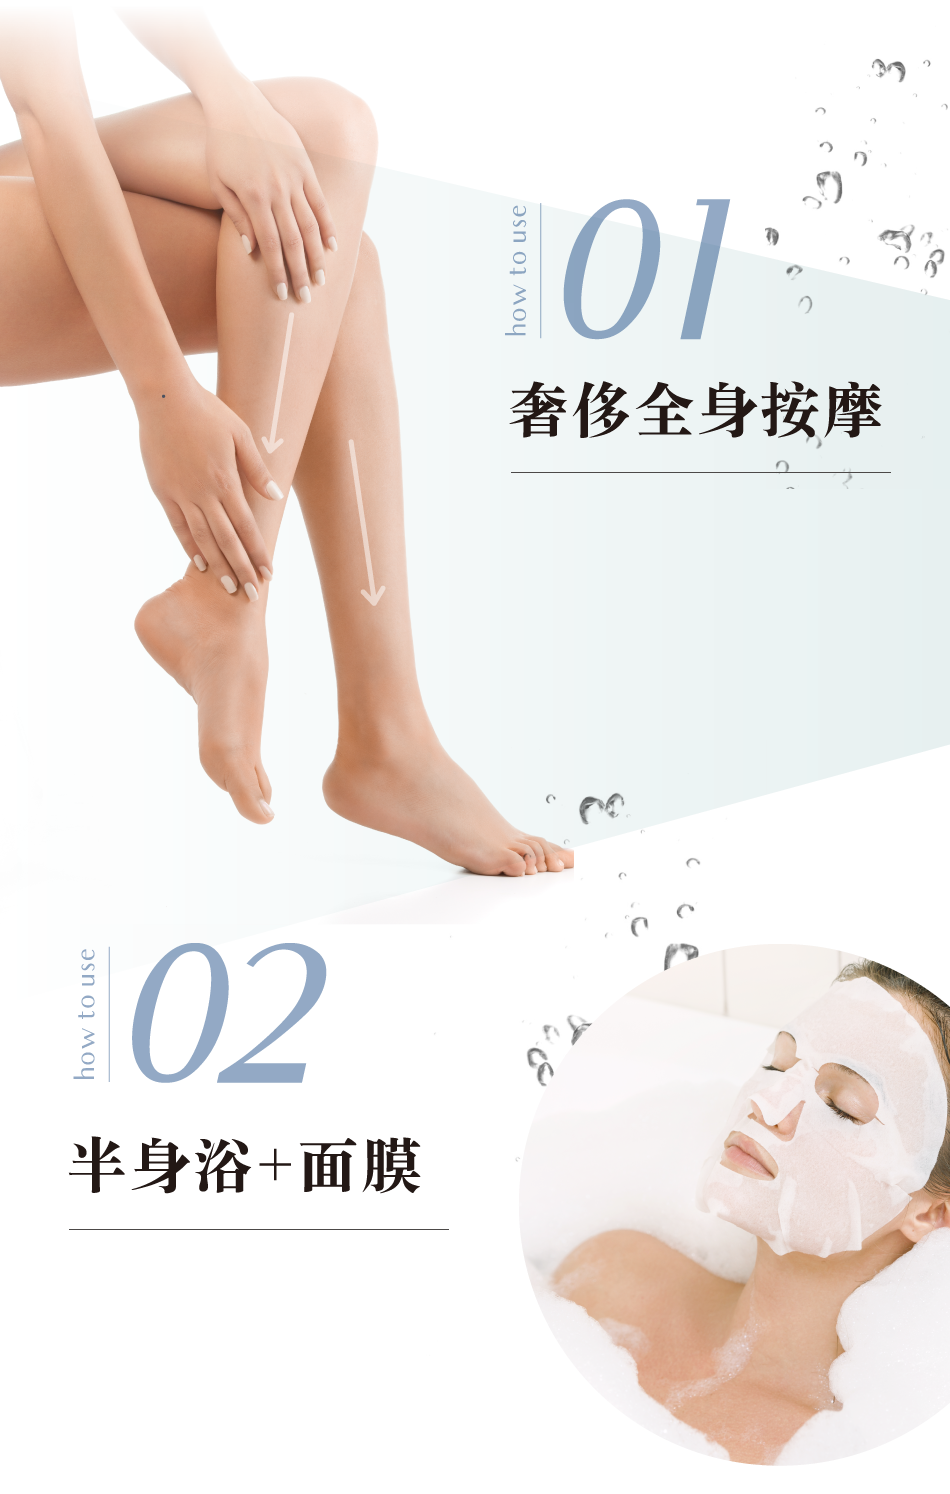 How to use01奢侈全身按摩How to use02半身浴+面膜